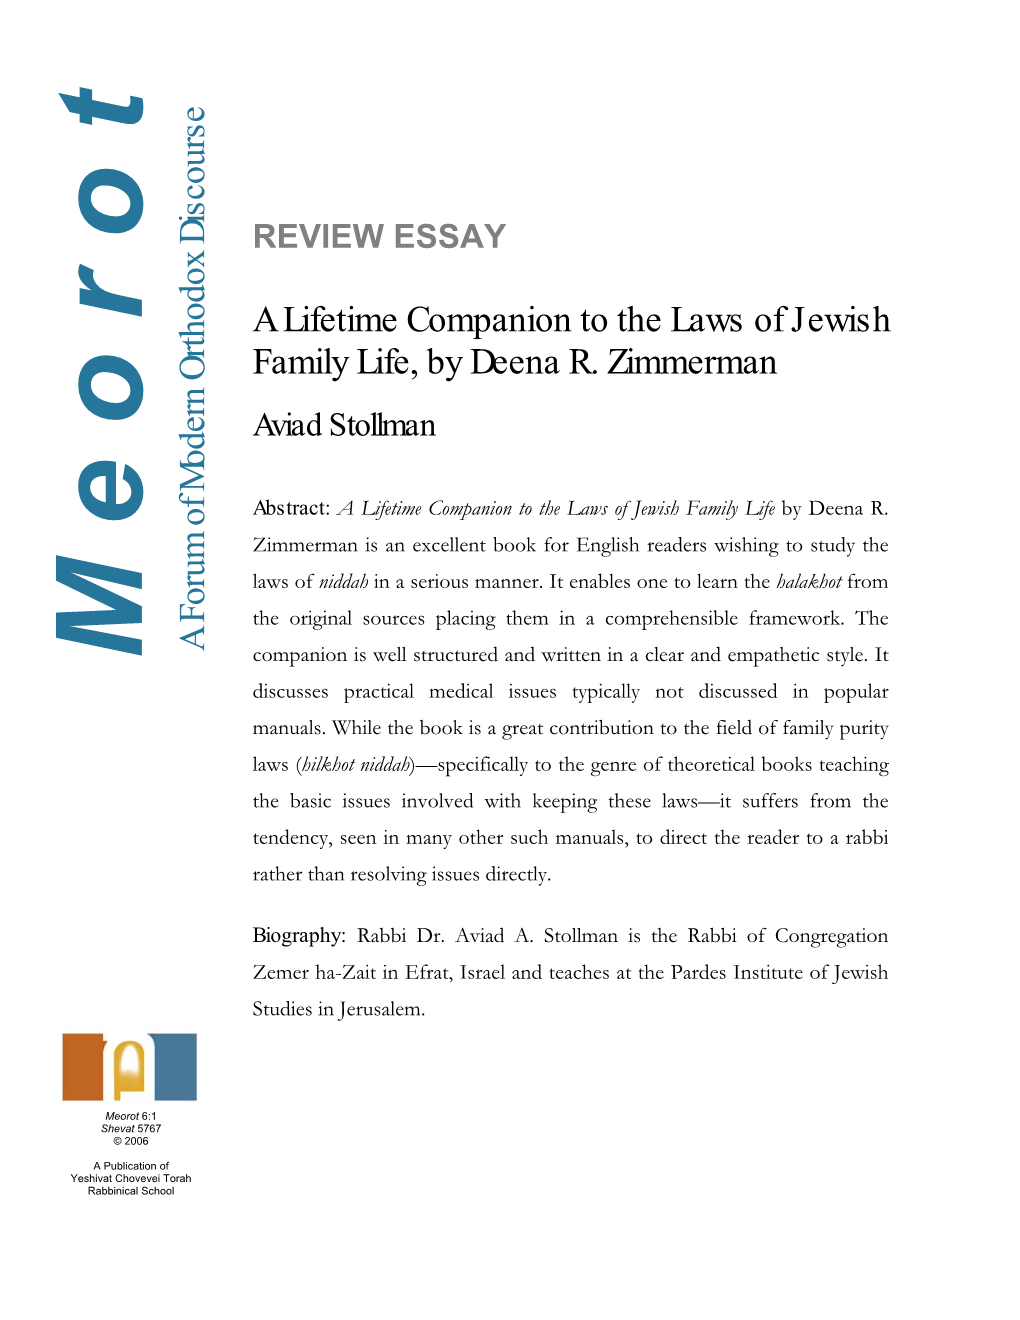 A Lifetime Companion to the Laws of Jewish Family Life by Deena R